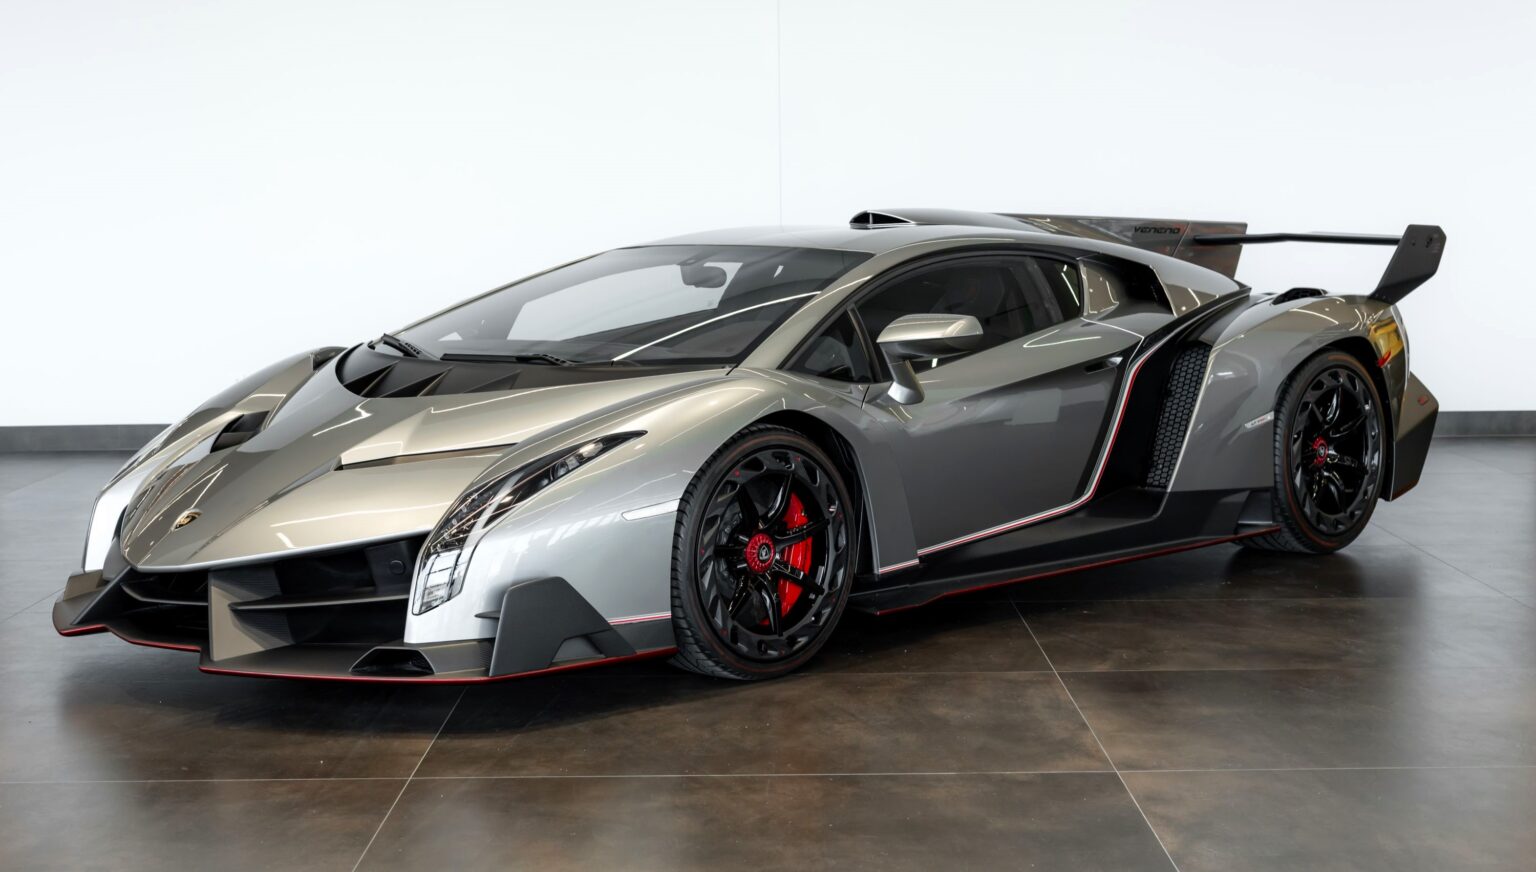 Rare and powerful: 2014 Lamborghini Veneno Coupe, one of only three made, hits auction with an estimated value over £3m.